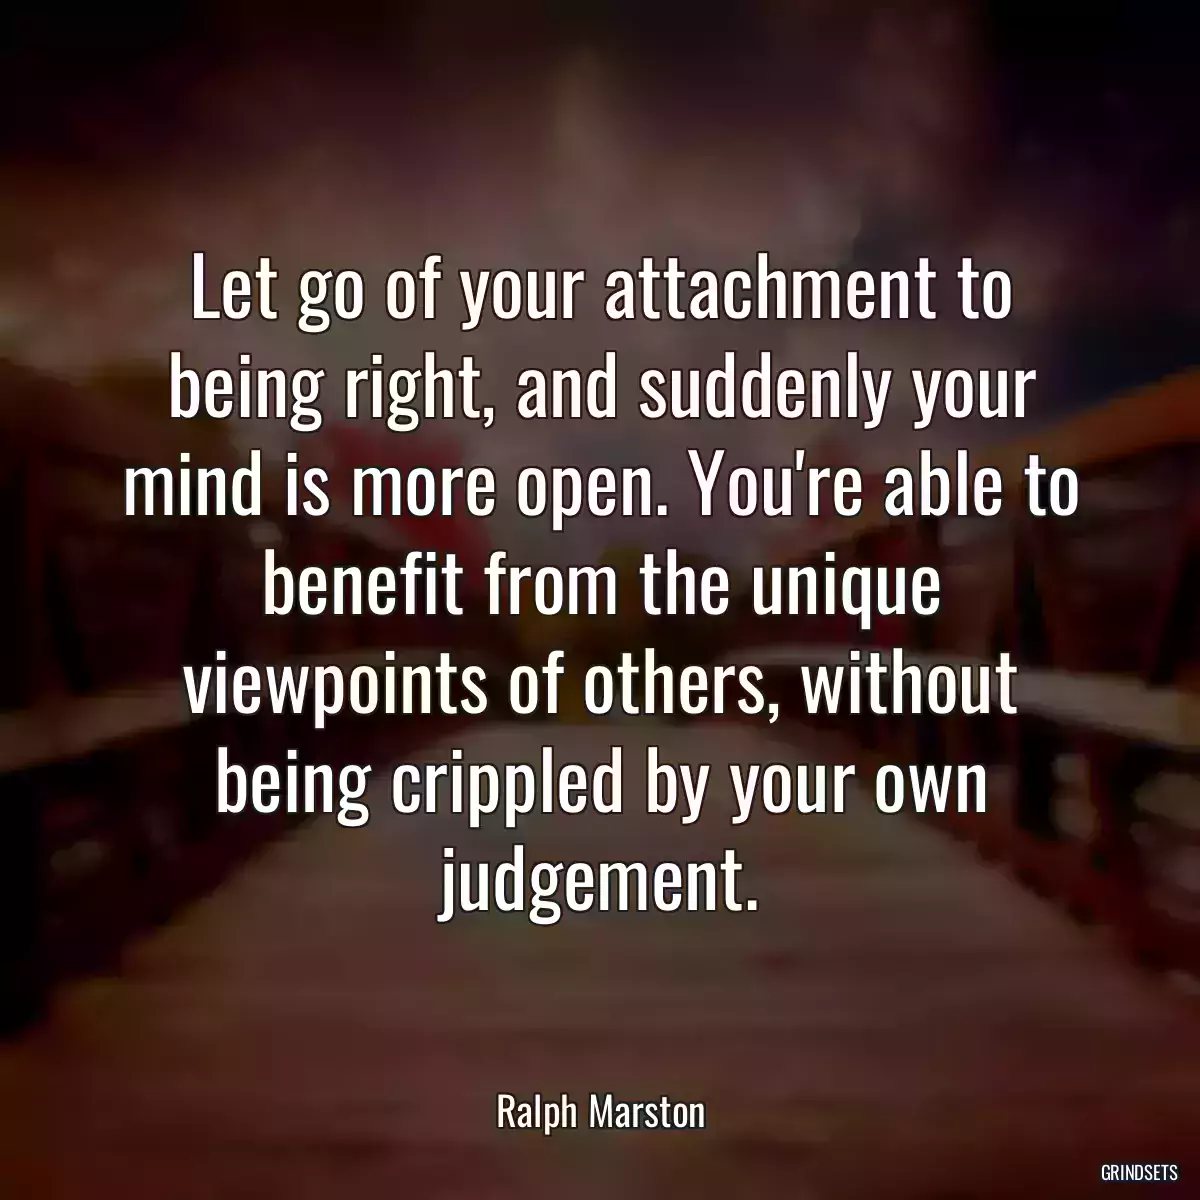 Let go of your attachment to being right, and suddenly your mind is more open. You\'re able to benefit from the unique viewpoints of others, without being crippled by your own judgement.